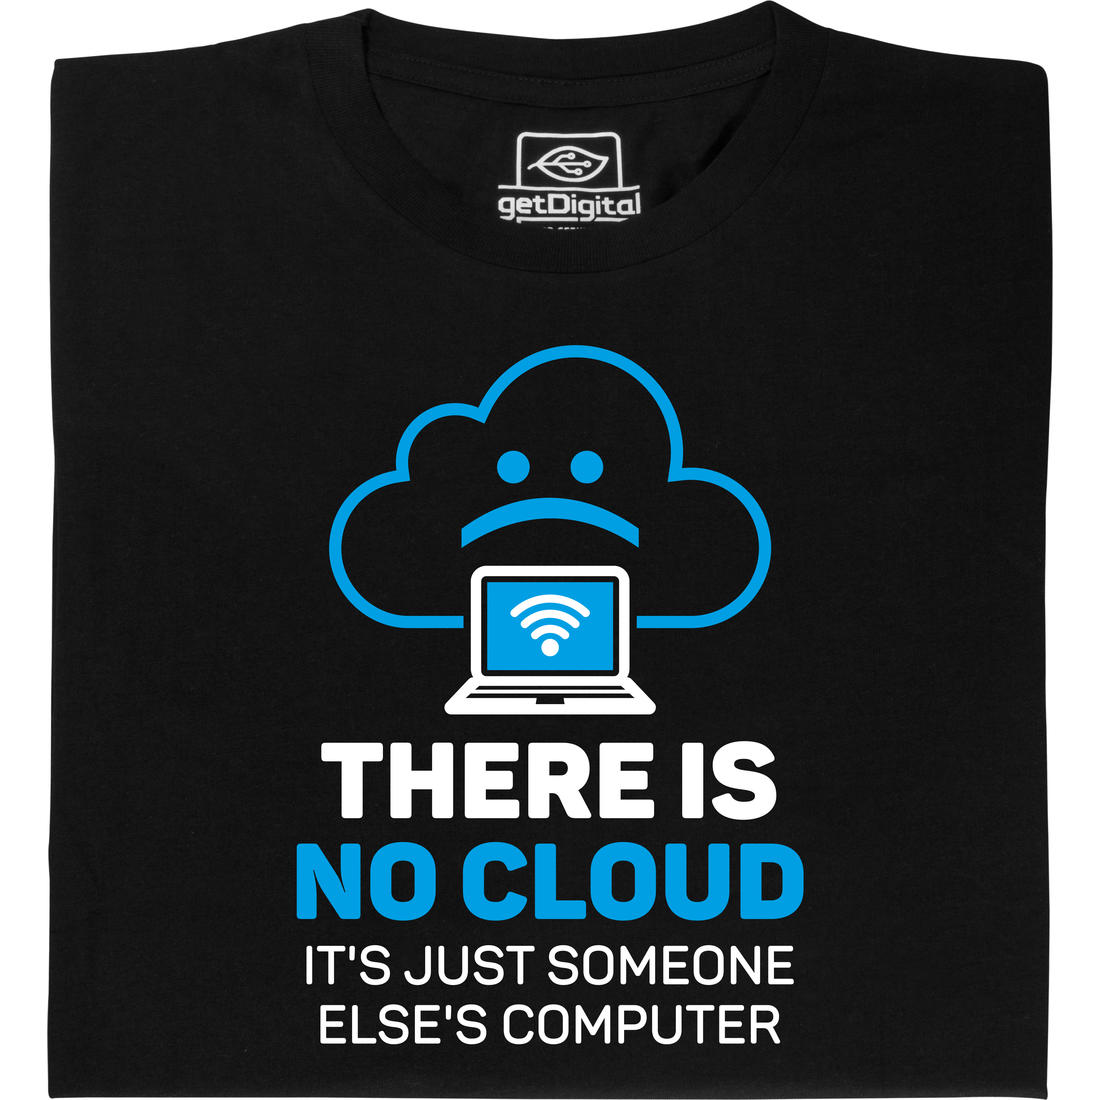  There is no cloud T-Shirt